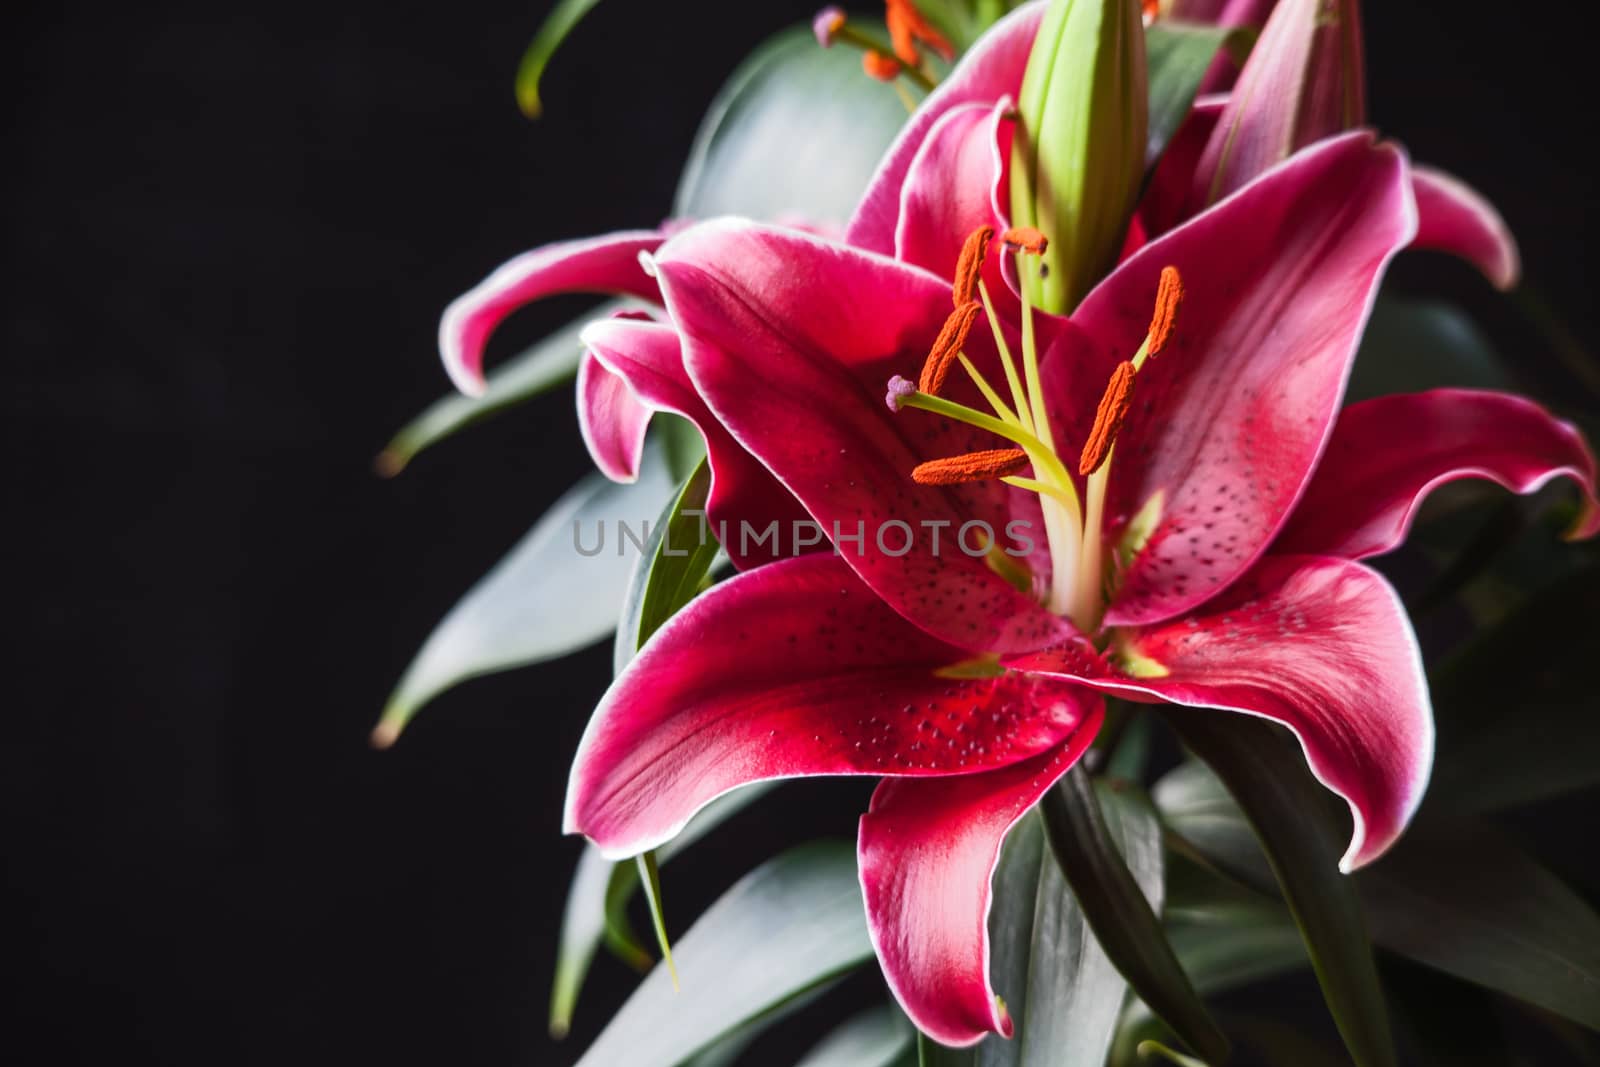 Red Oriental Lily 2 by kobus_peche